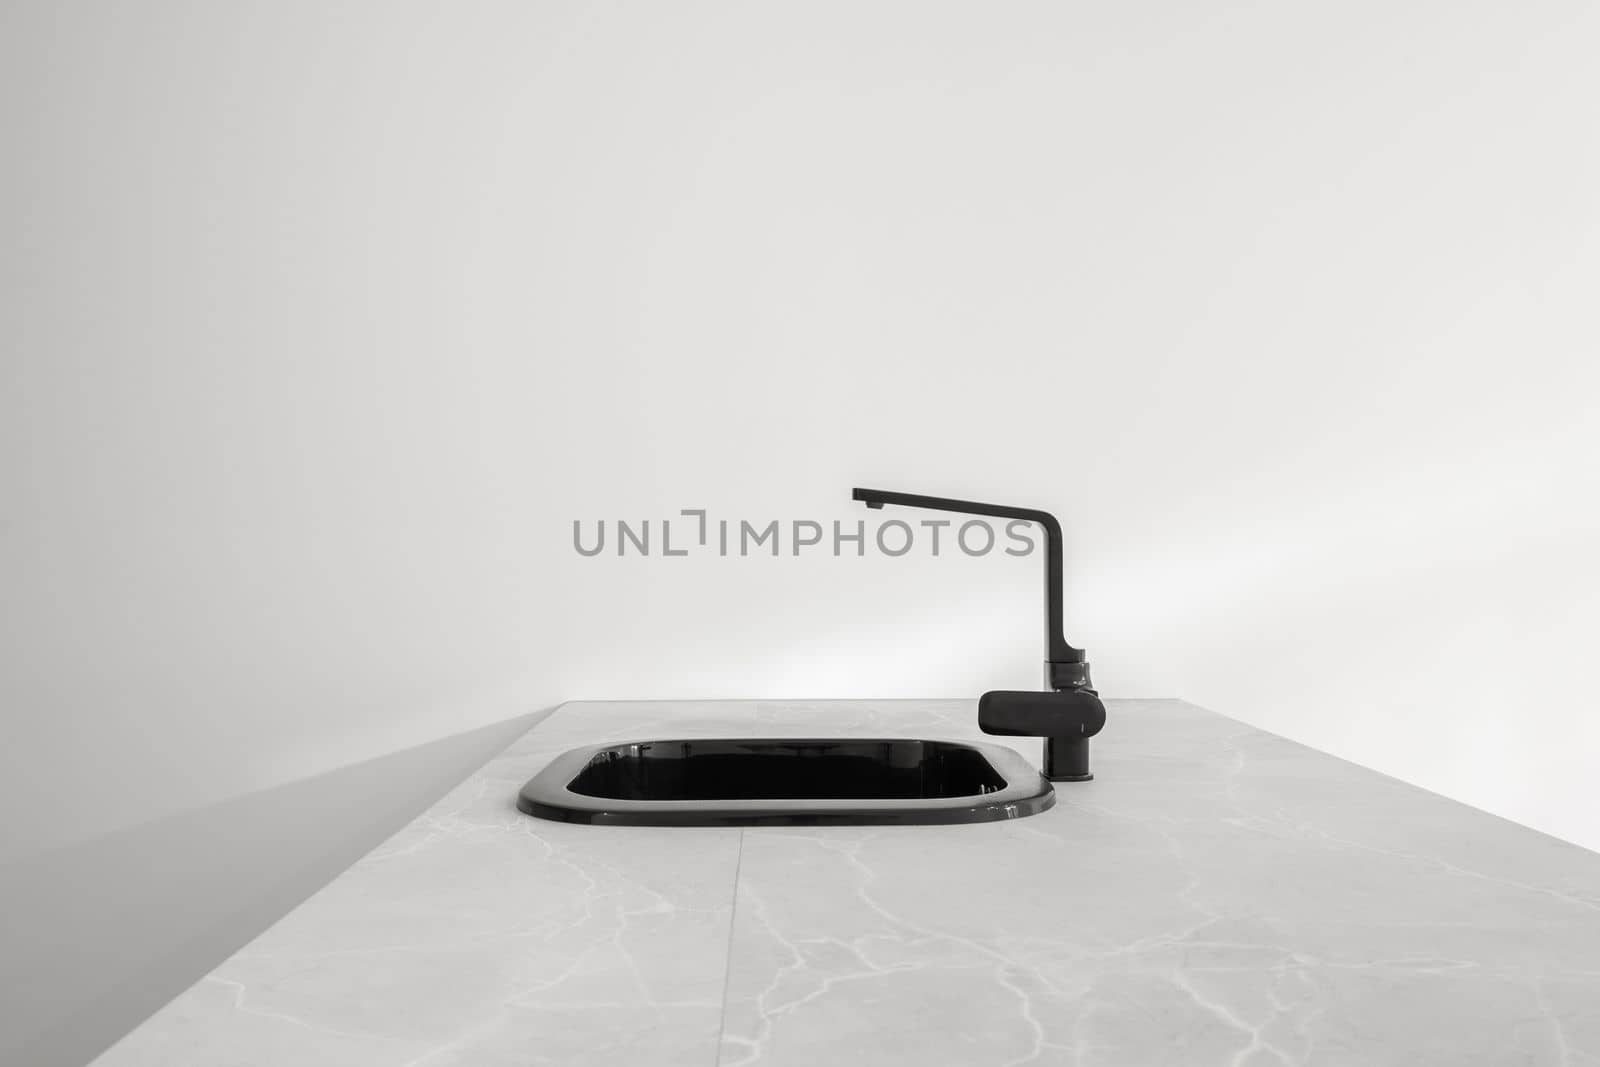 Black metal kitchen sink with trendy faucet sits on large white stone kitchen island on light background. Concept of kitchen after renovation or in new building. New plumbing by apavlin